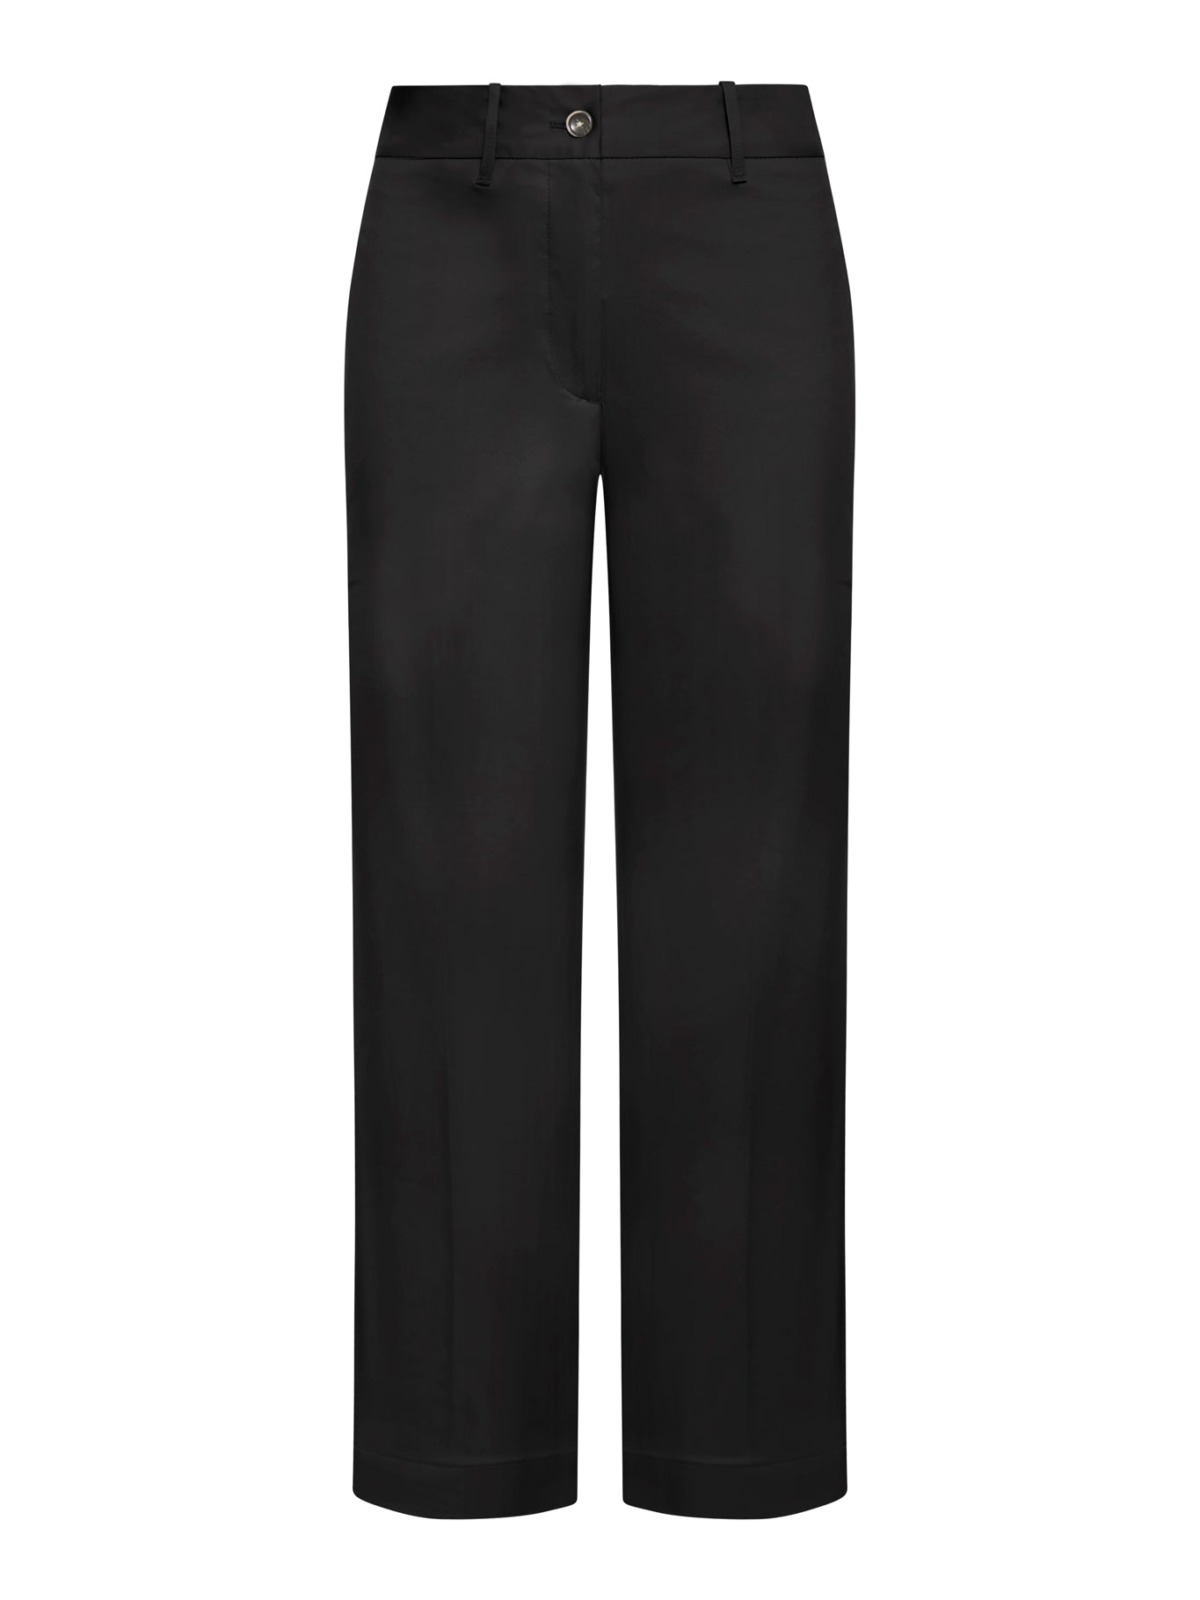 Nine In The Morning - Women's Trousers Black Suitnegozi GOOFASH